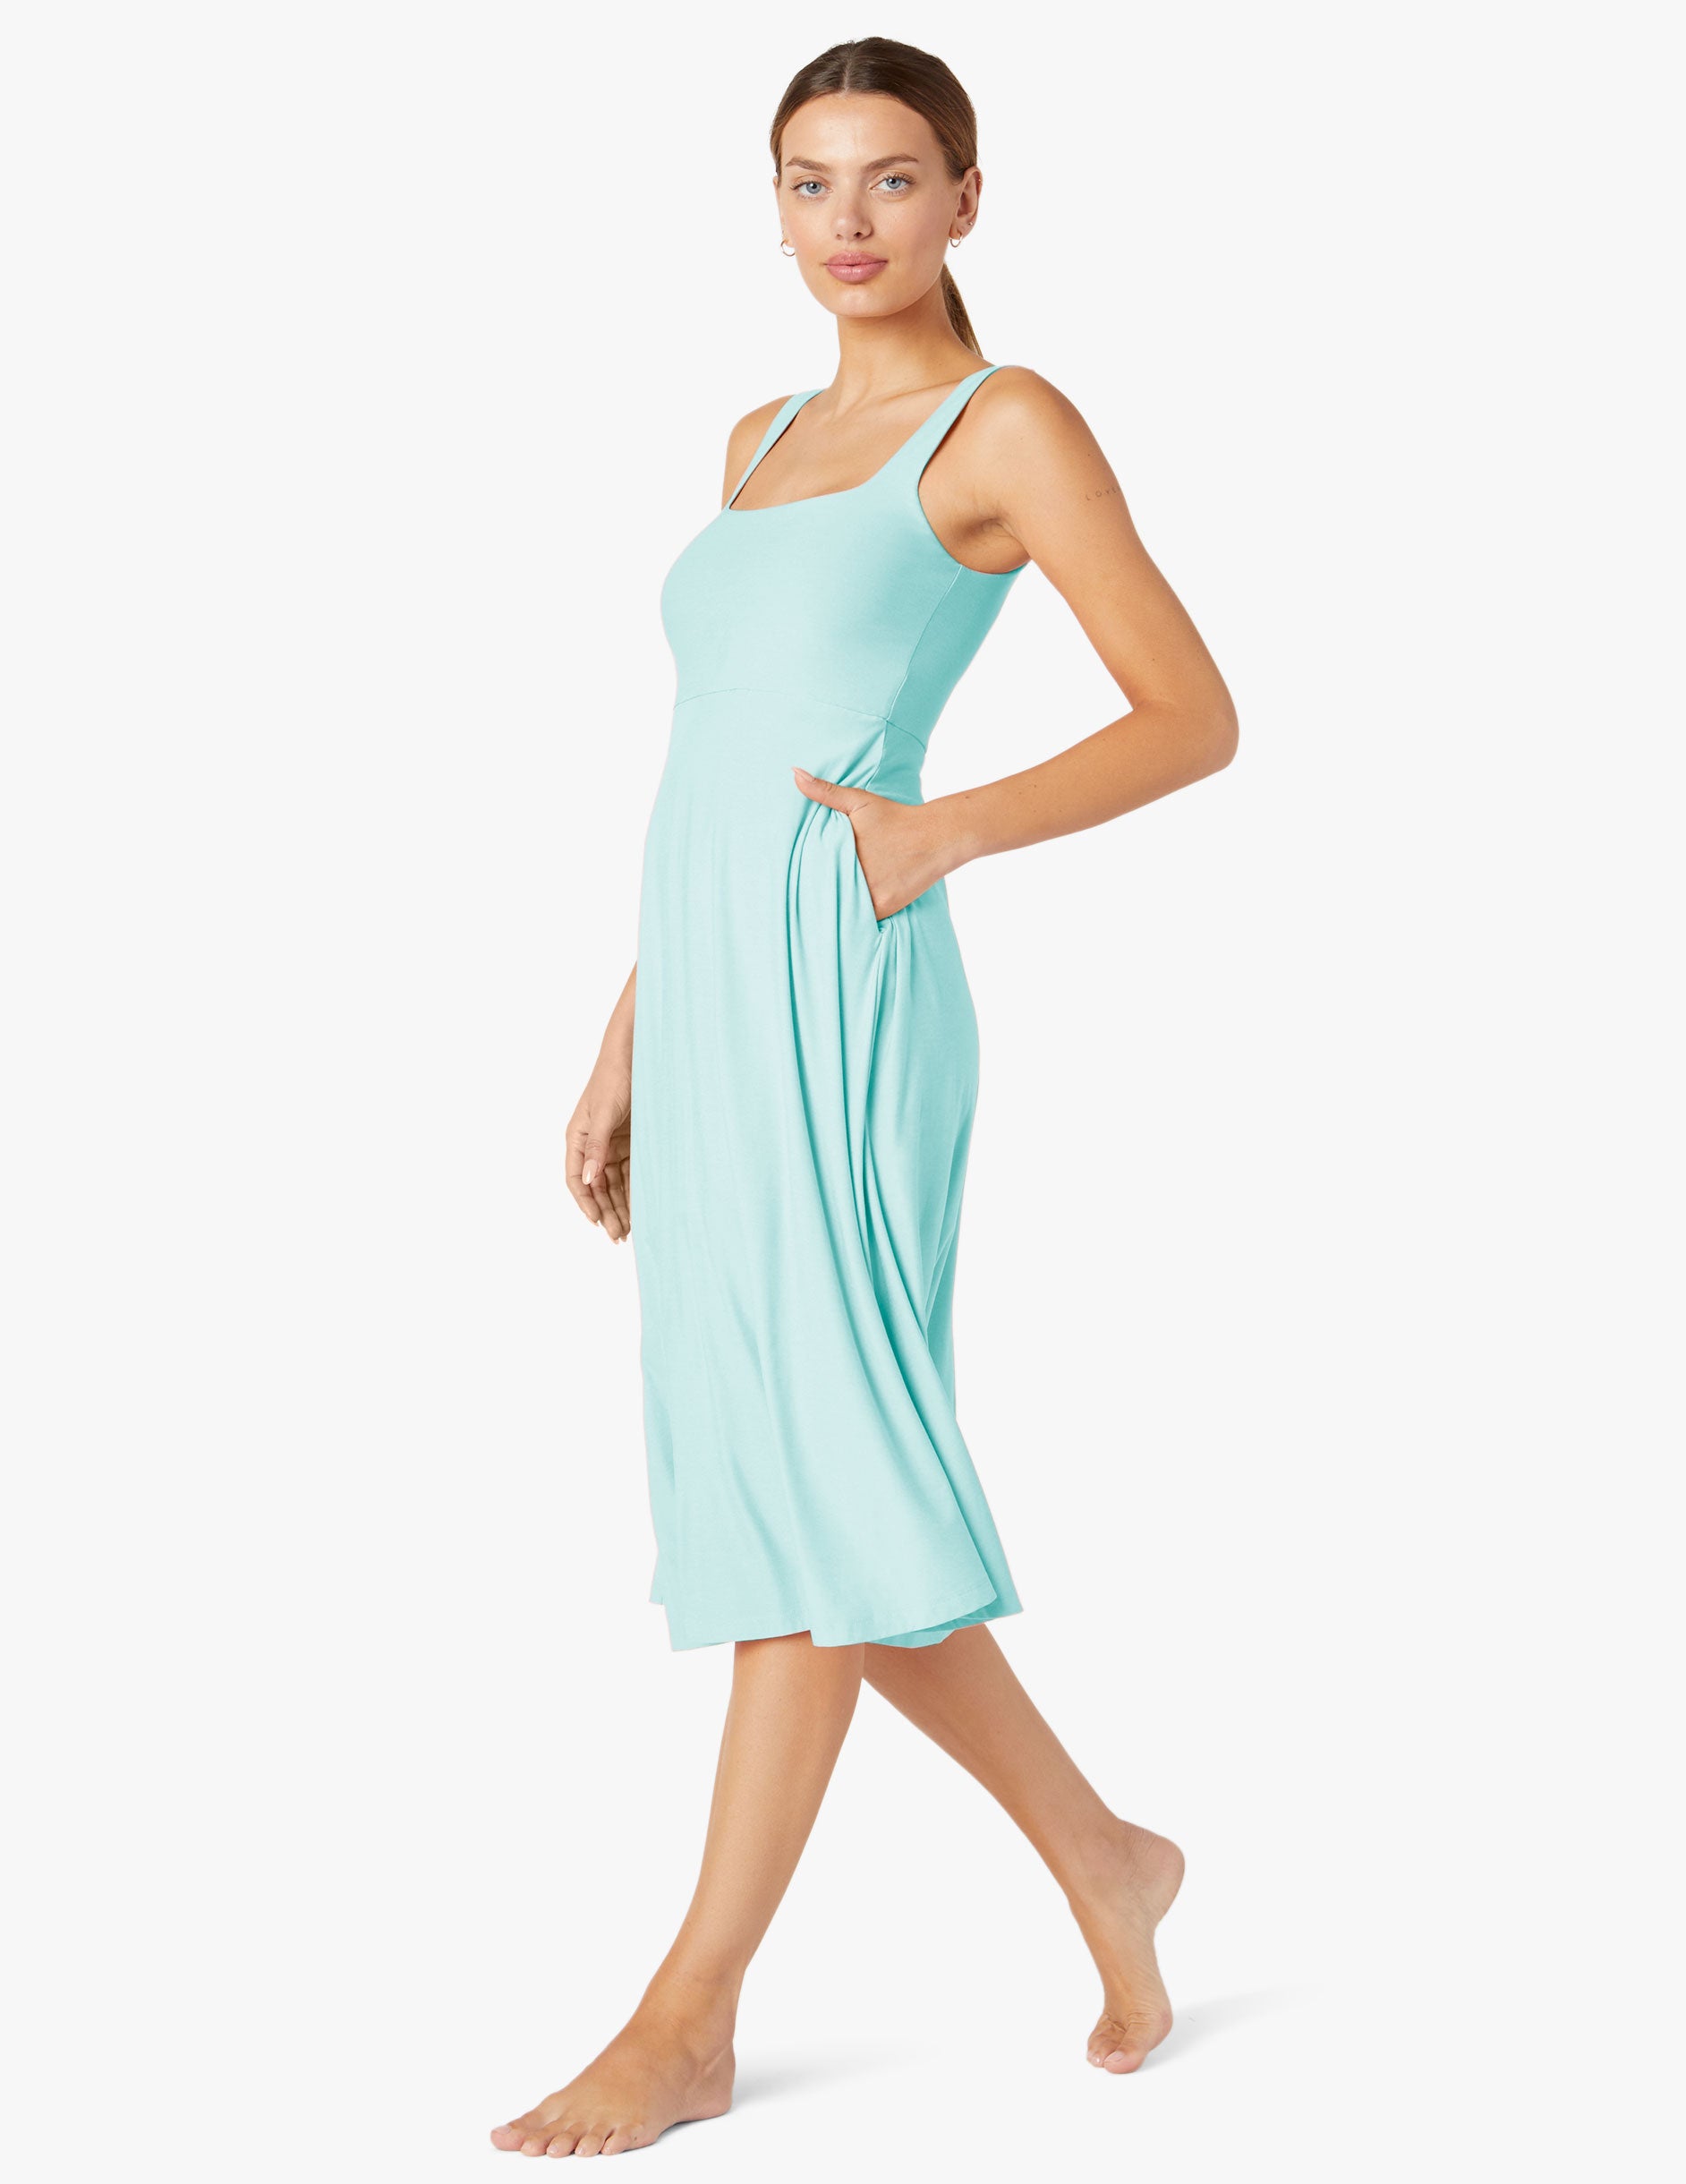 Beyond Yoga® Featherweight At The Ready Squareneck Dress For Women